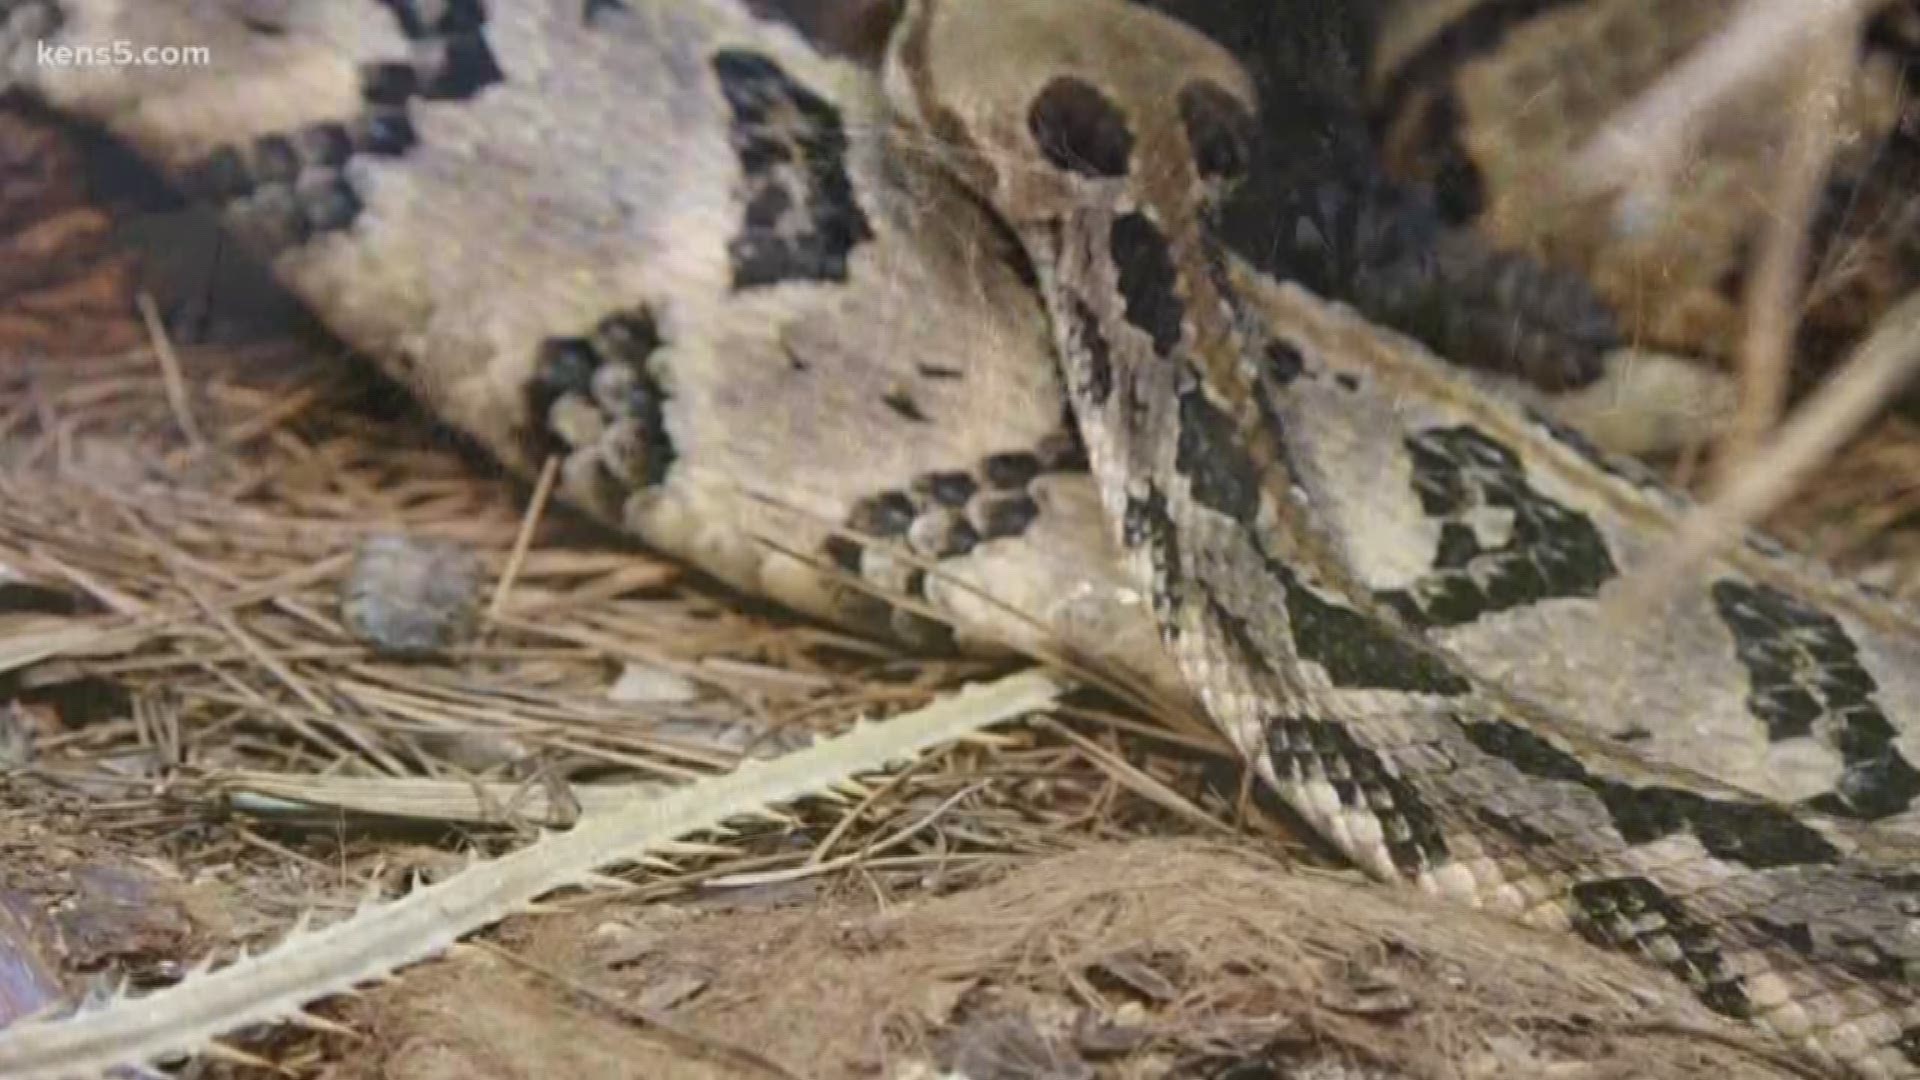 The triple digit heat isn't the only increasing danger in South Texas. The warmer temperatures are bringing out venomous, slithering creatures. Eyewitness News reporter Sharon Ko with the warning -- after one woman was bit by a snake.